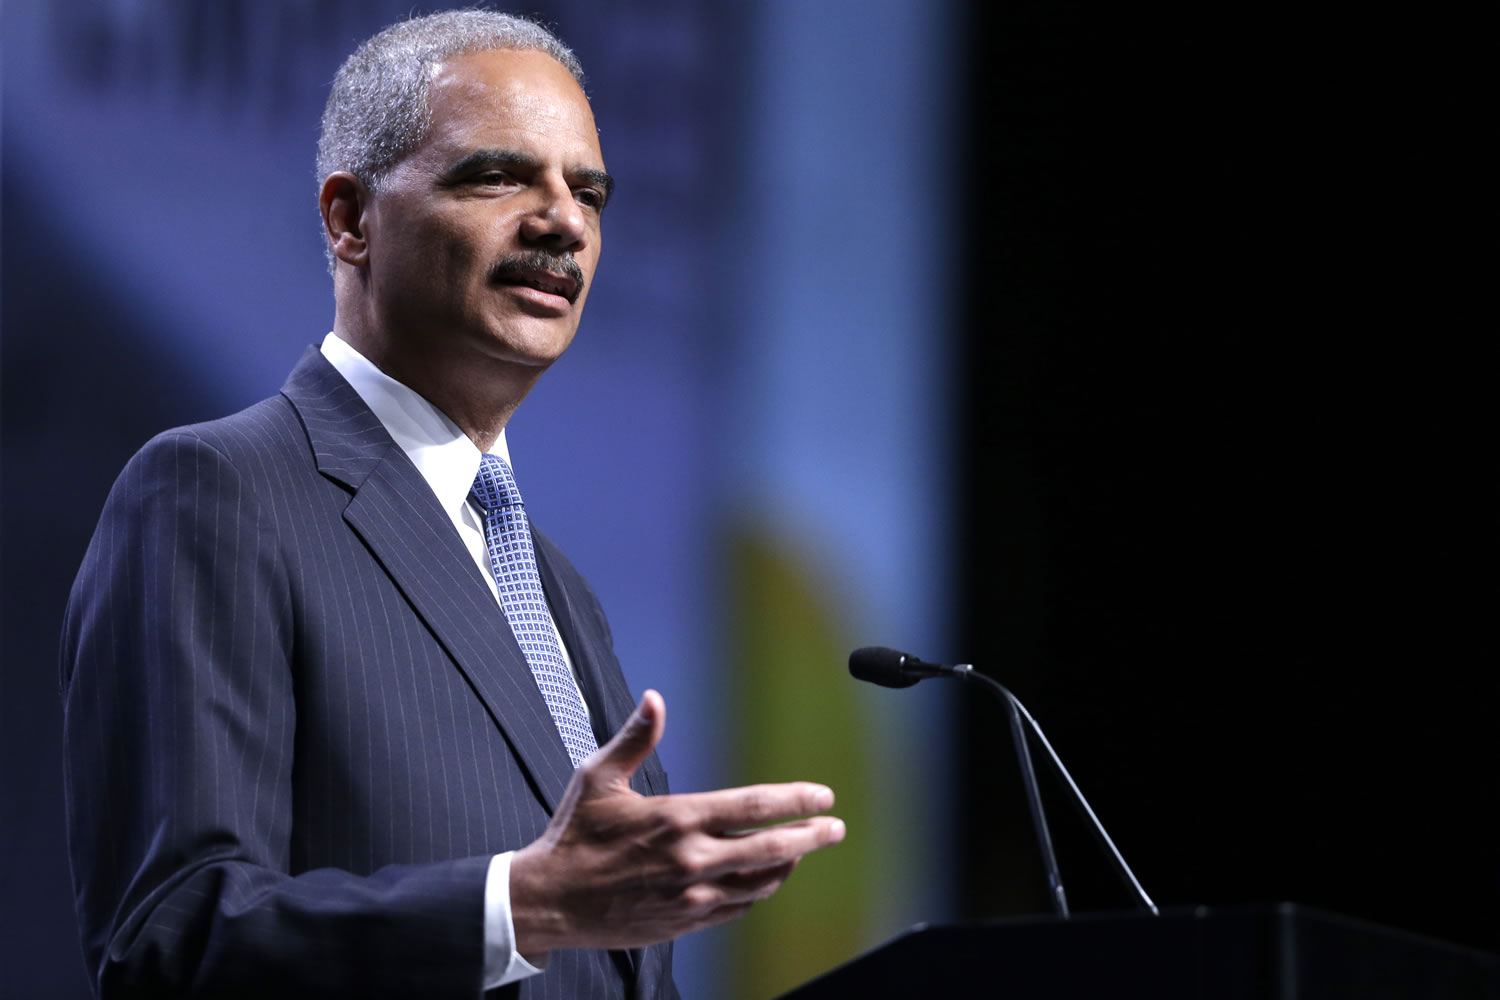 Attorney General Eric Holder speaks at the National Urban League annual conference Thursday in Philadelphia.